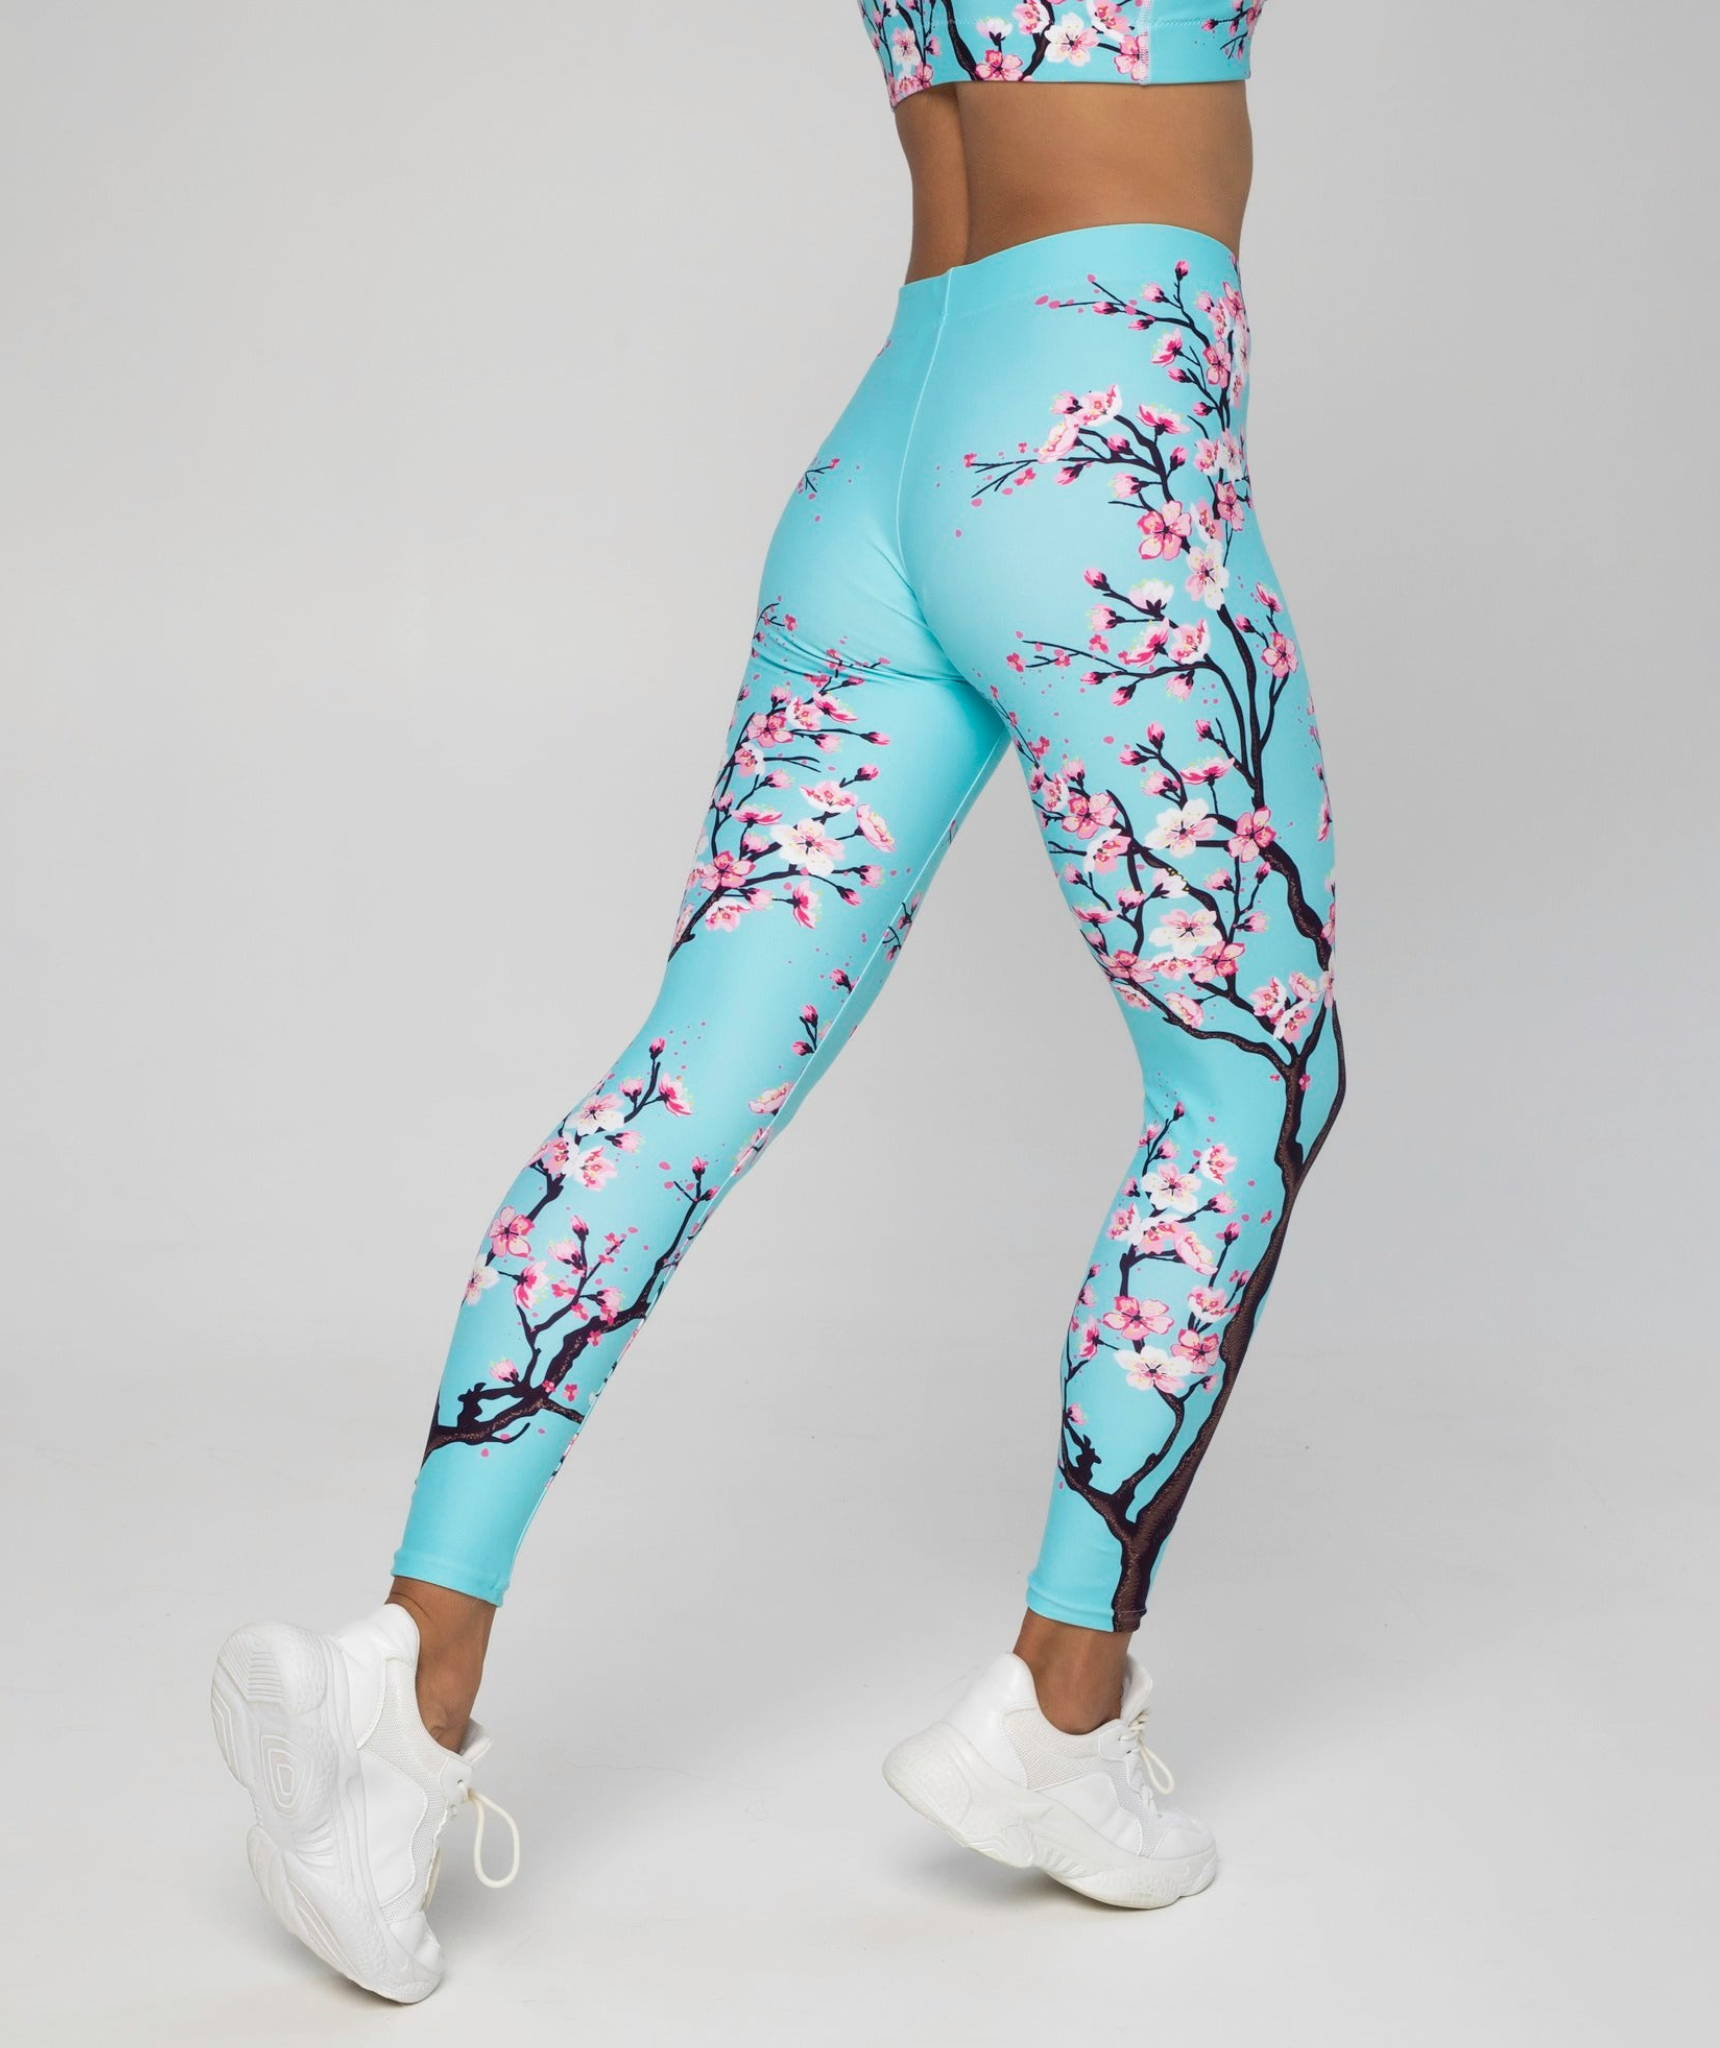 The Kooples Wild Blossom Floral Stretch Leggings